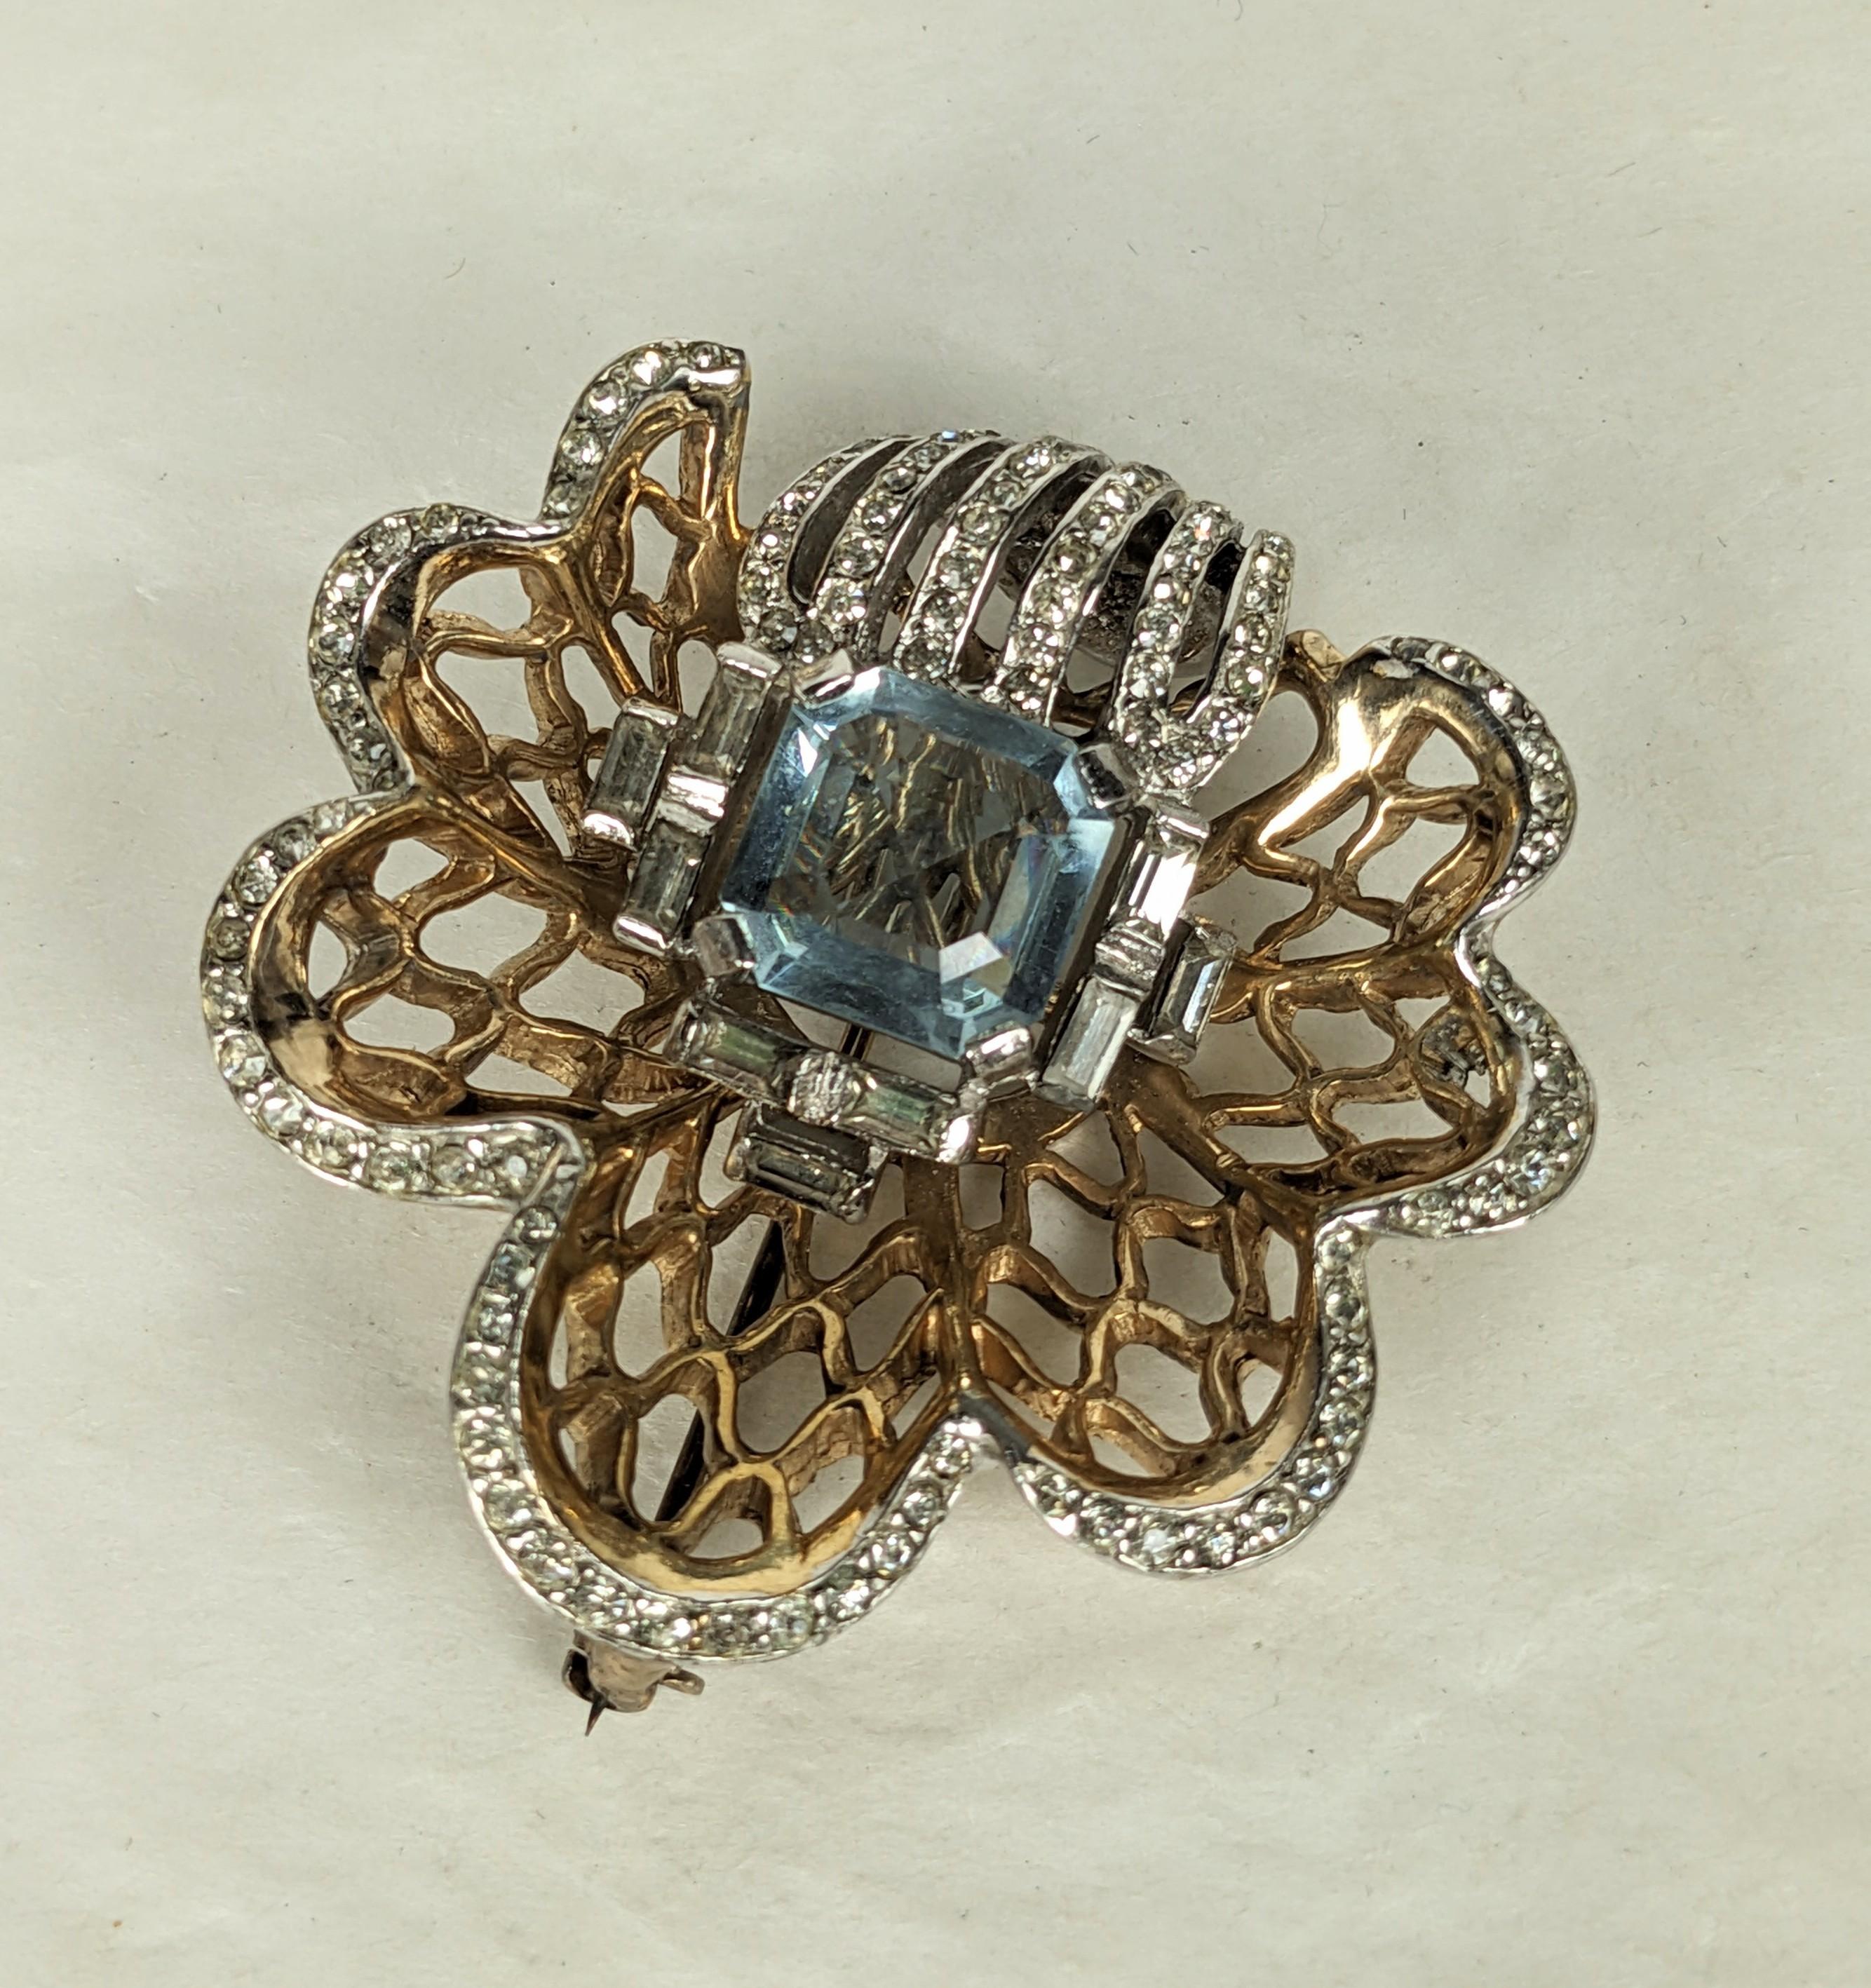 Reja Retro brooch of  a focal faux pale blue amythest square cut stone with crystal baguette accents and crystal rhinestone pave. Set into a dimensional Retro fretwork shell of pale pink gold plate over rhodium plated base metal. Very Good